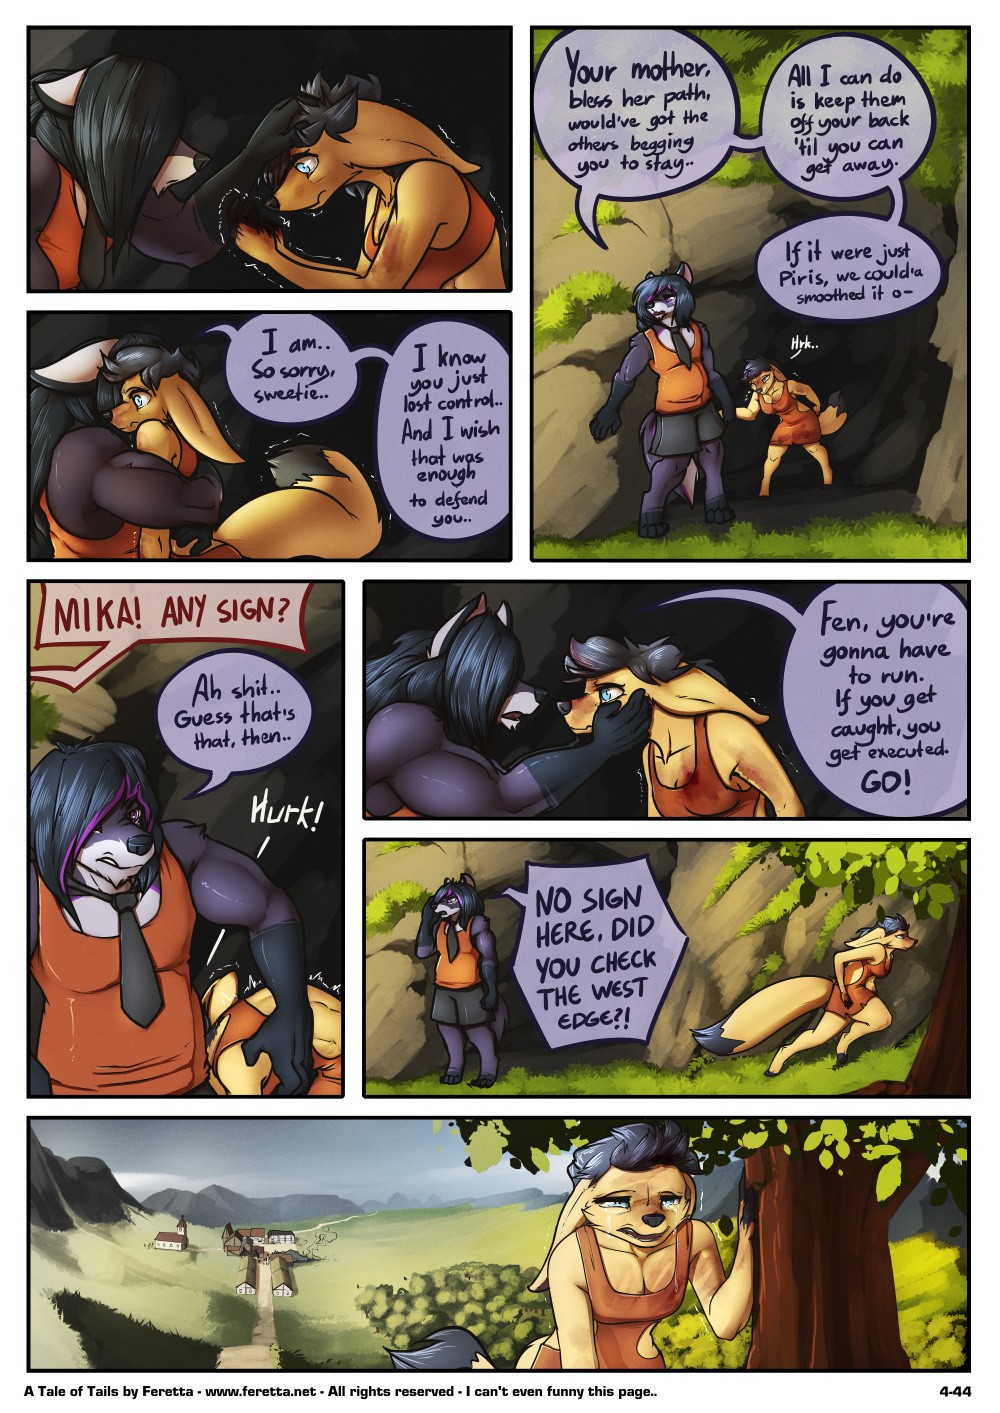 A Tale of Tails 4 - Matters of the mind porn comic picture 44